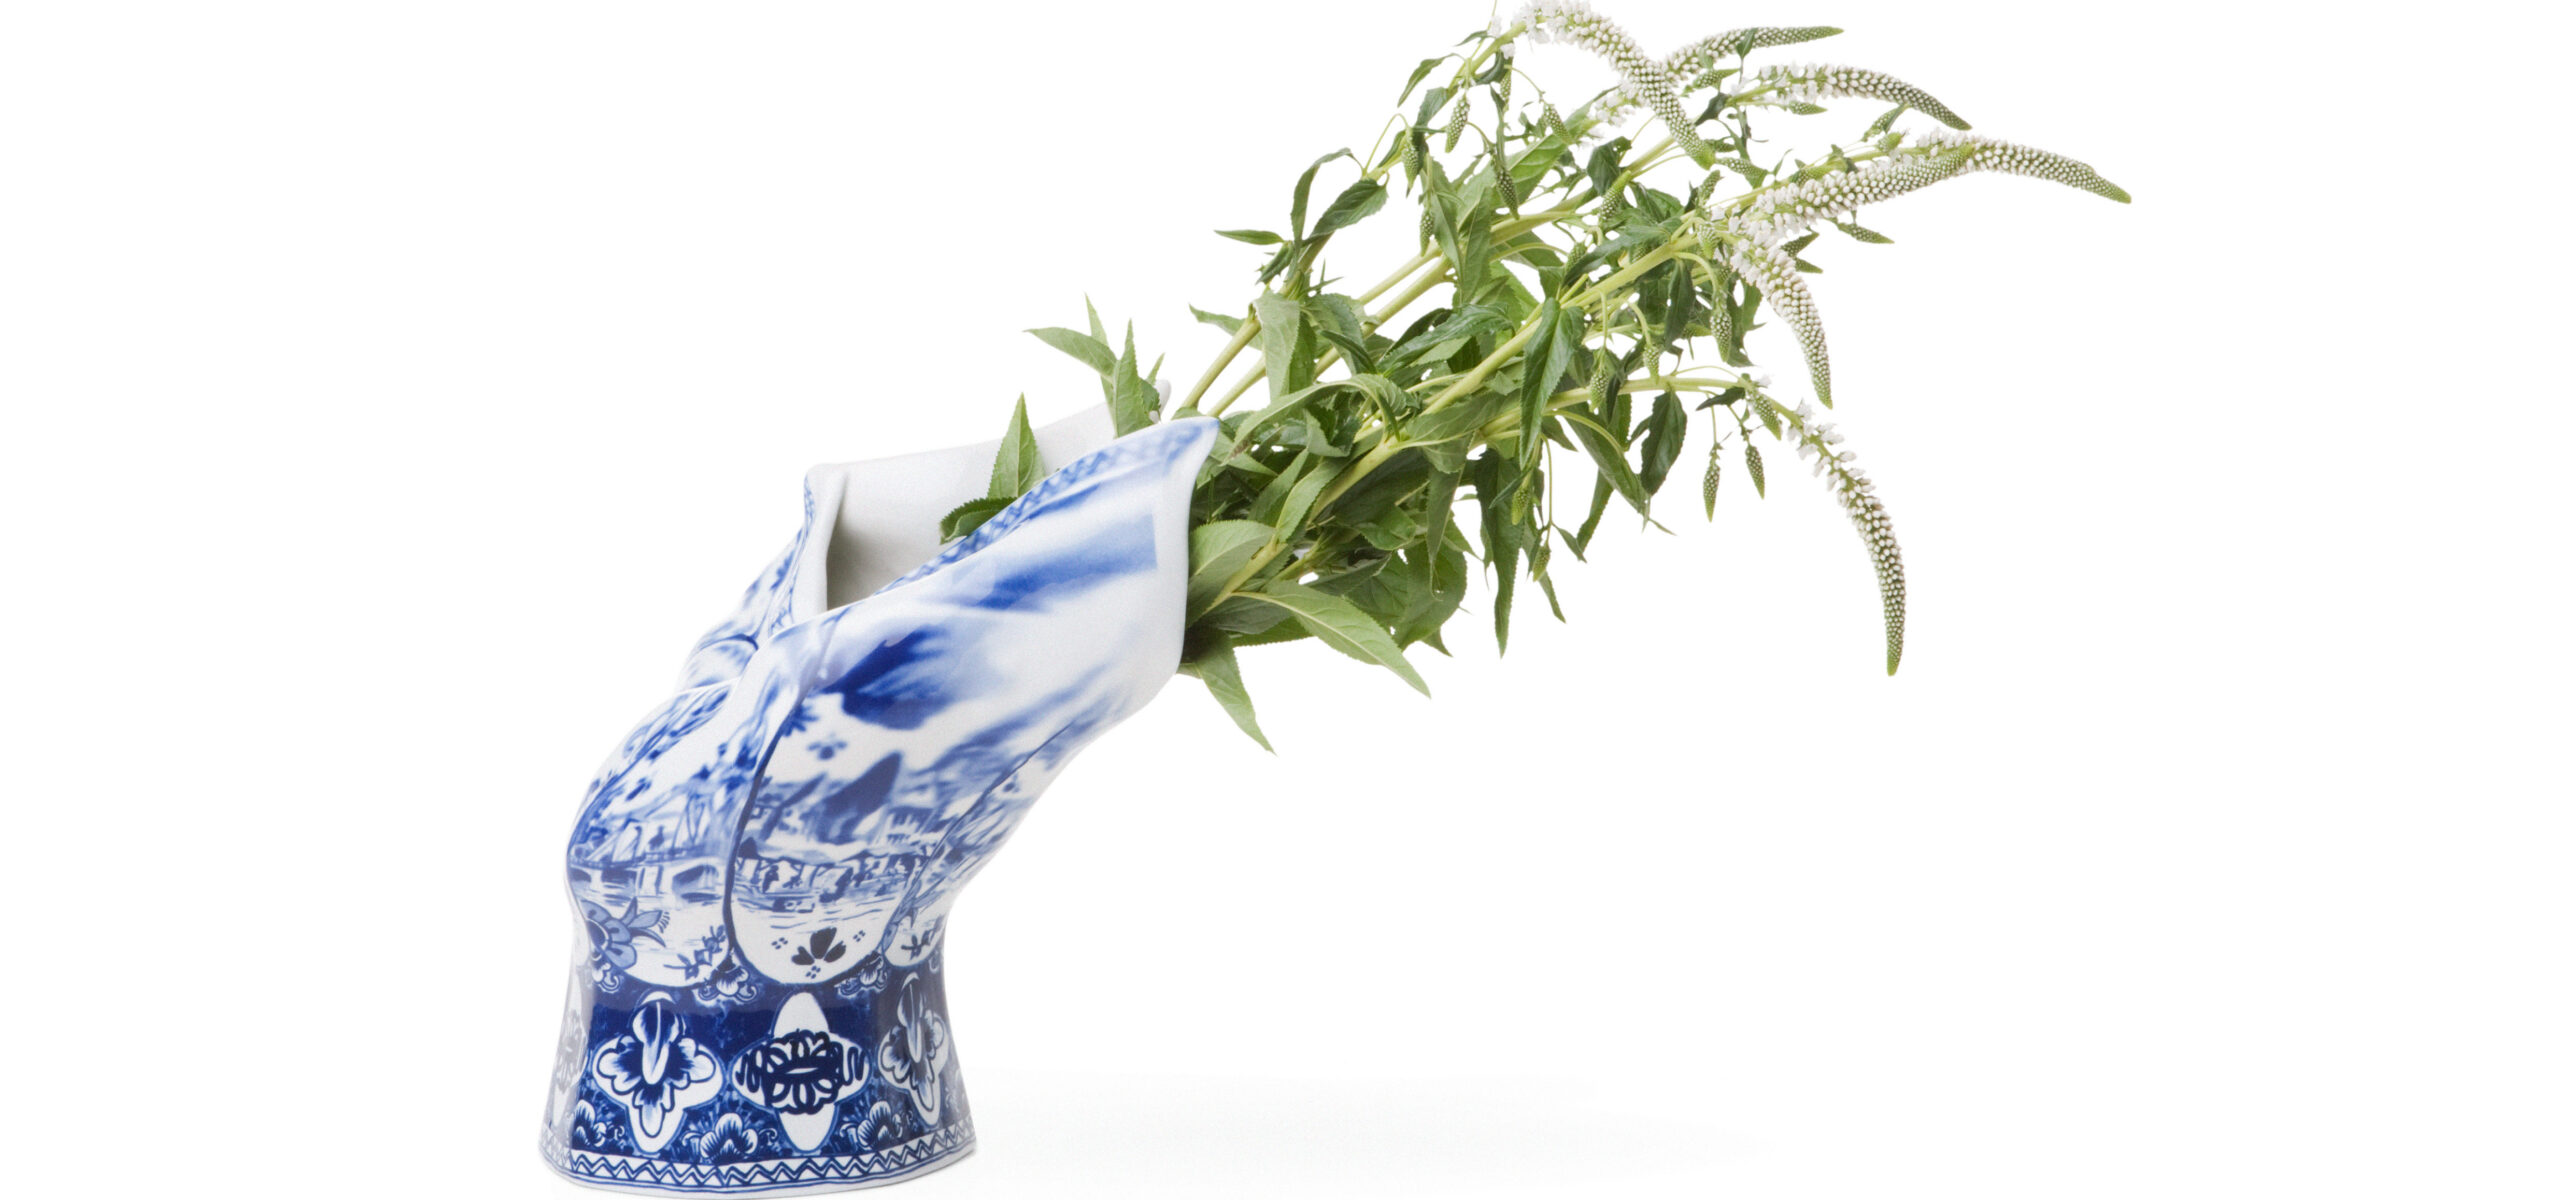 Blue and White ceramic vase bent toward right with greenery sticking out